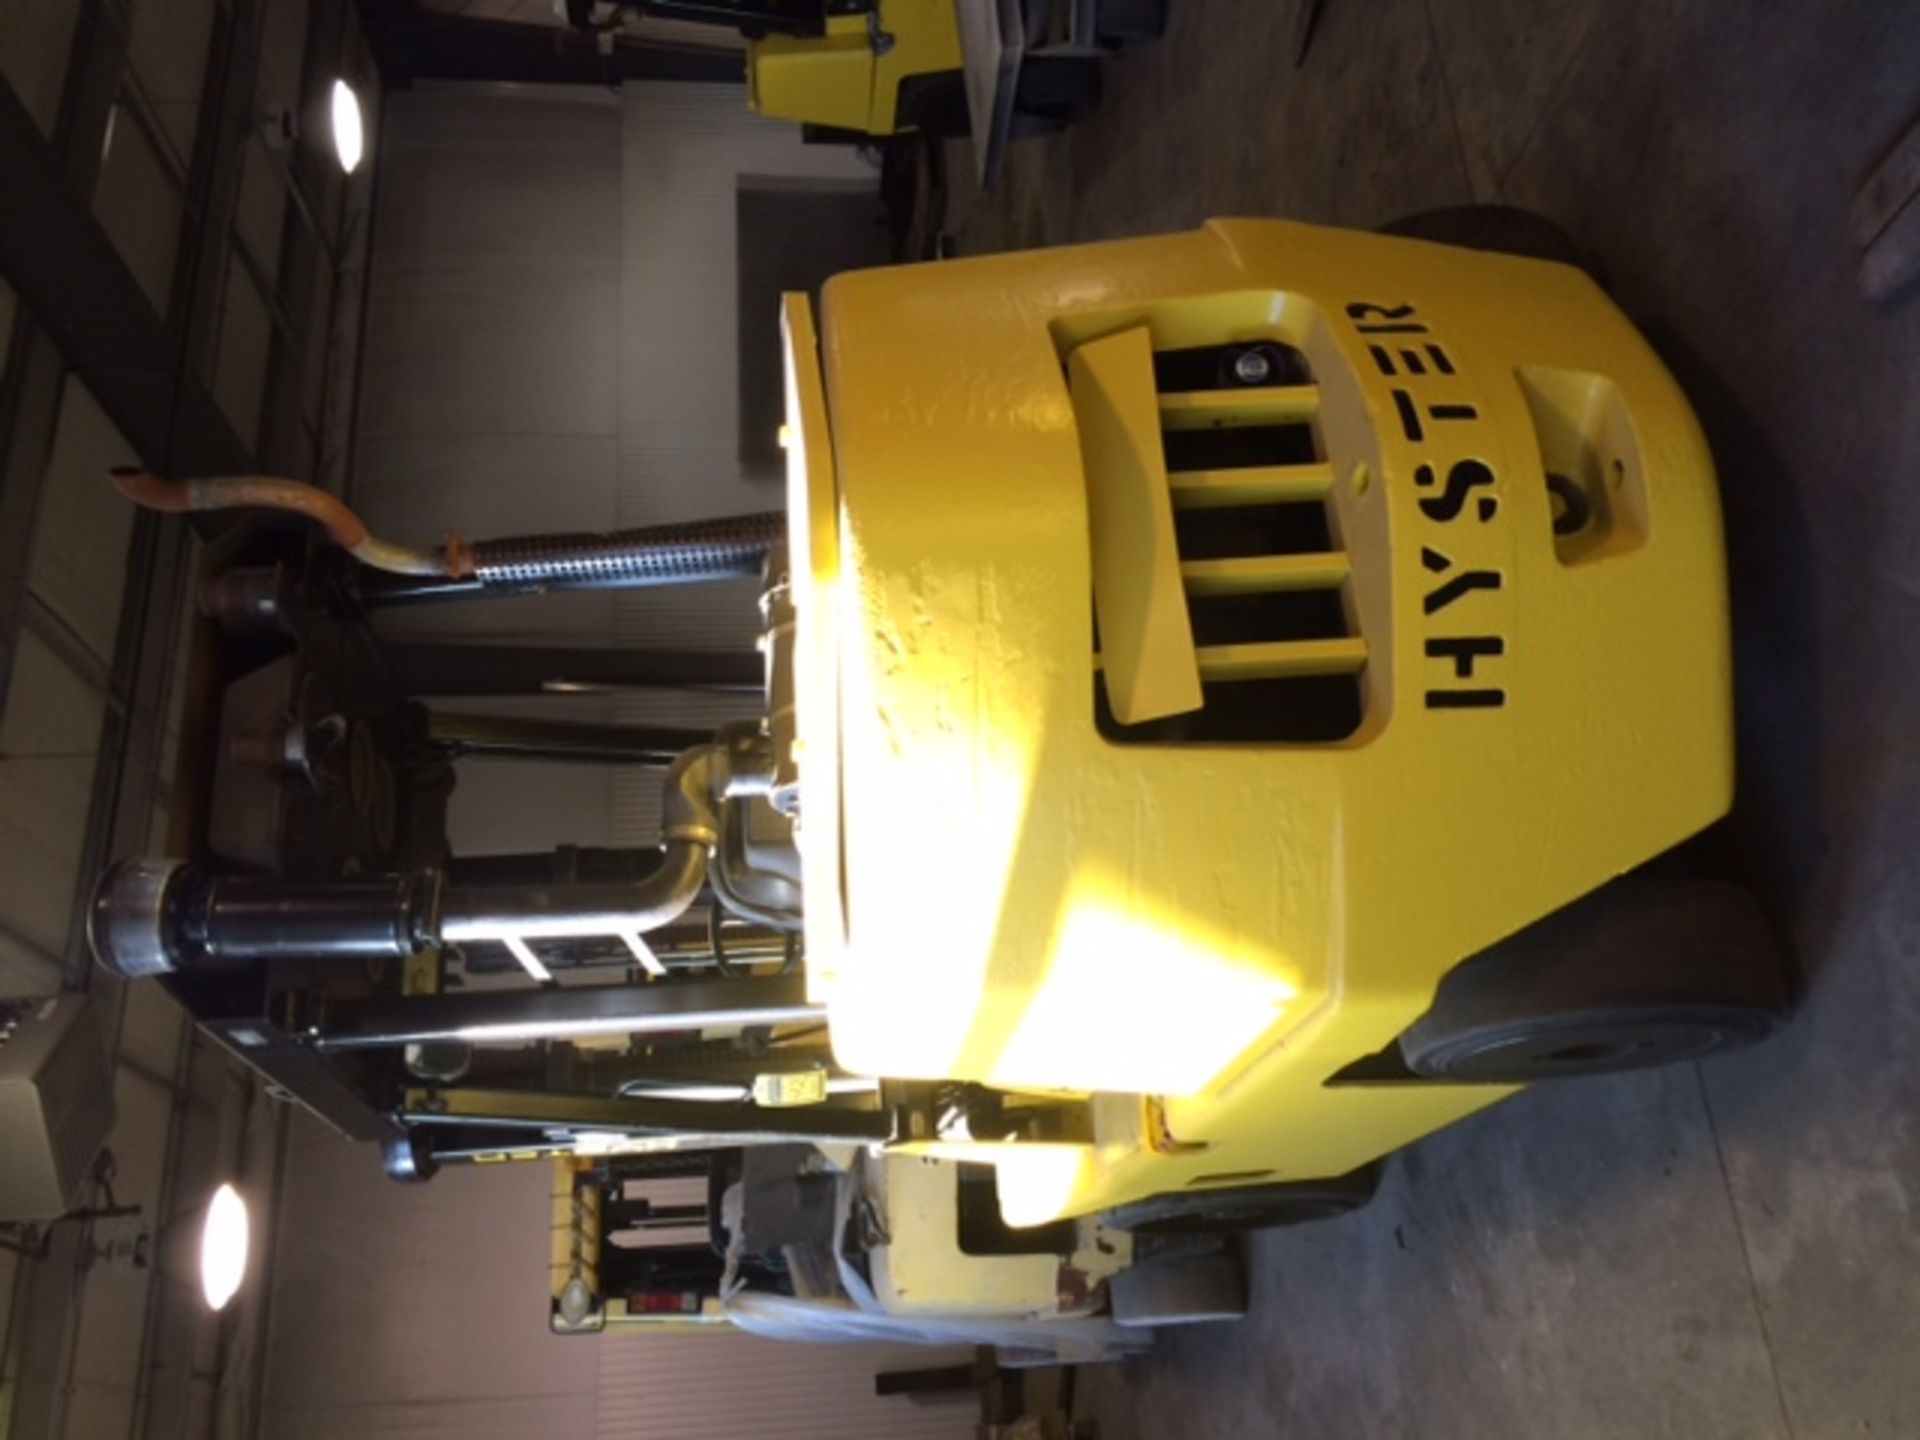 2006 HYSTER 15,500-lb. Capacity Forklift, Model S155XL2,Perkins Diesel Engine, 2-Speed Lever - Image 4 of 4